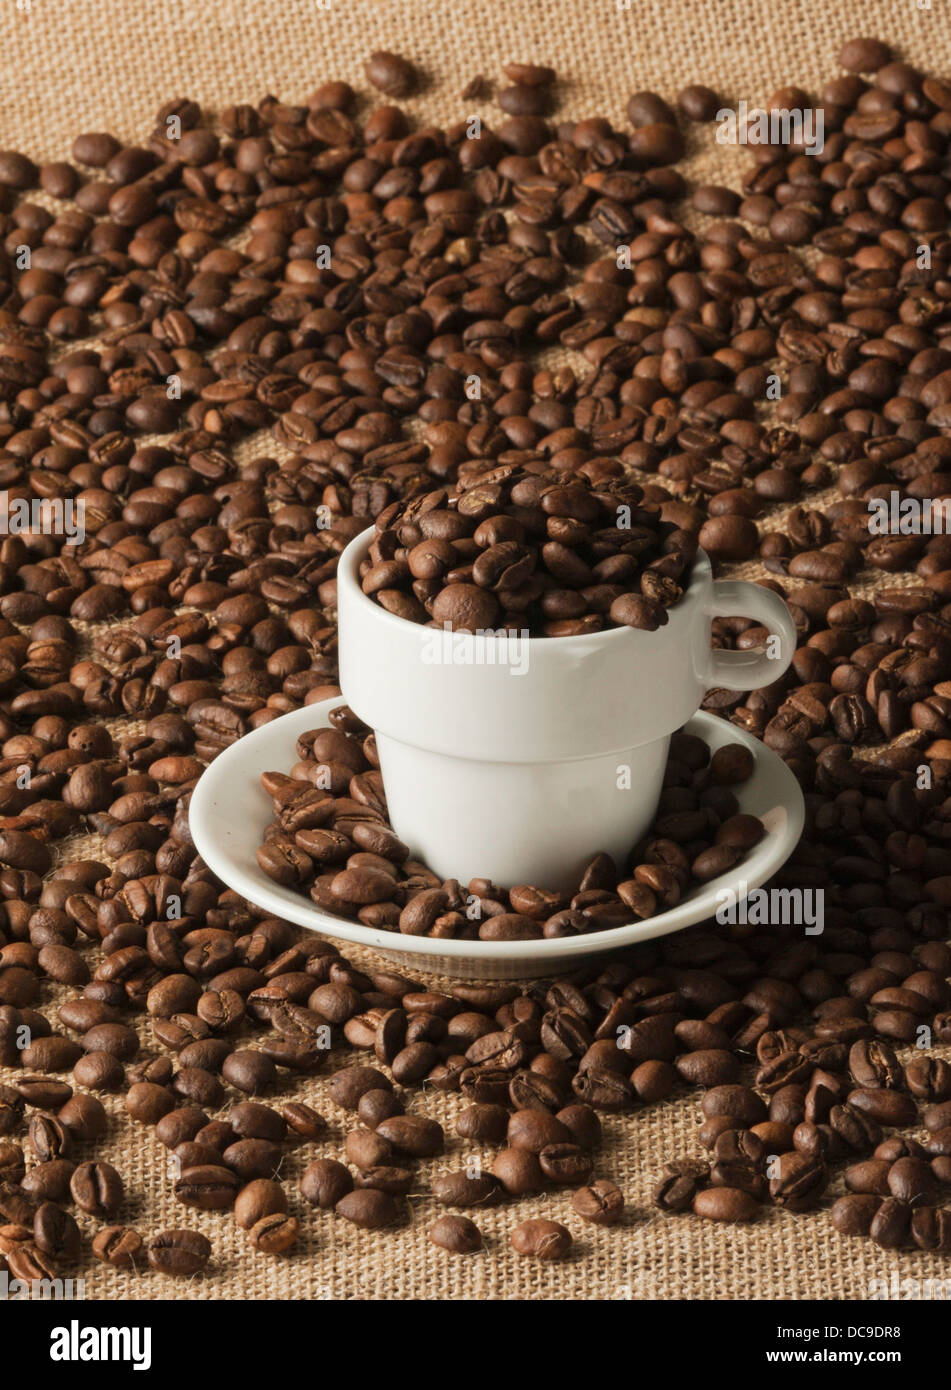 Coffee beans and a coffee cup Stock Photo